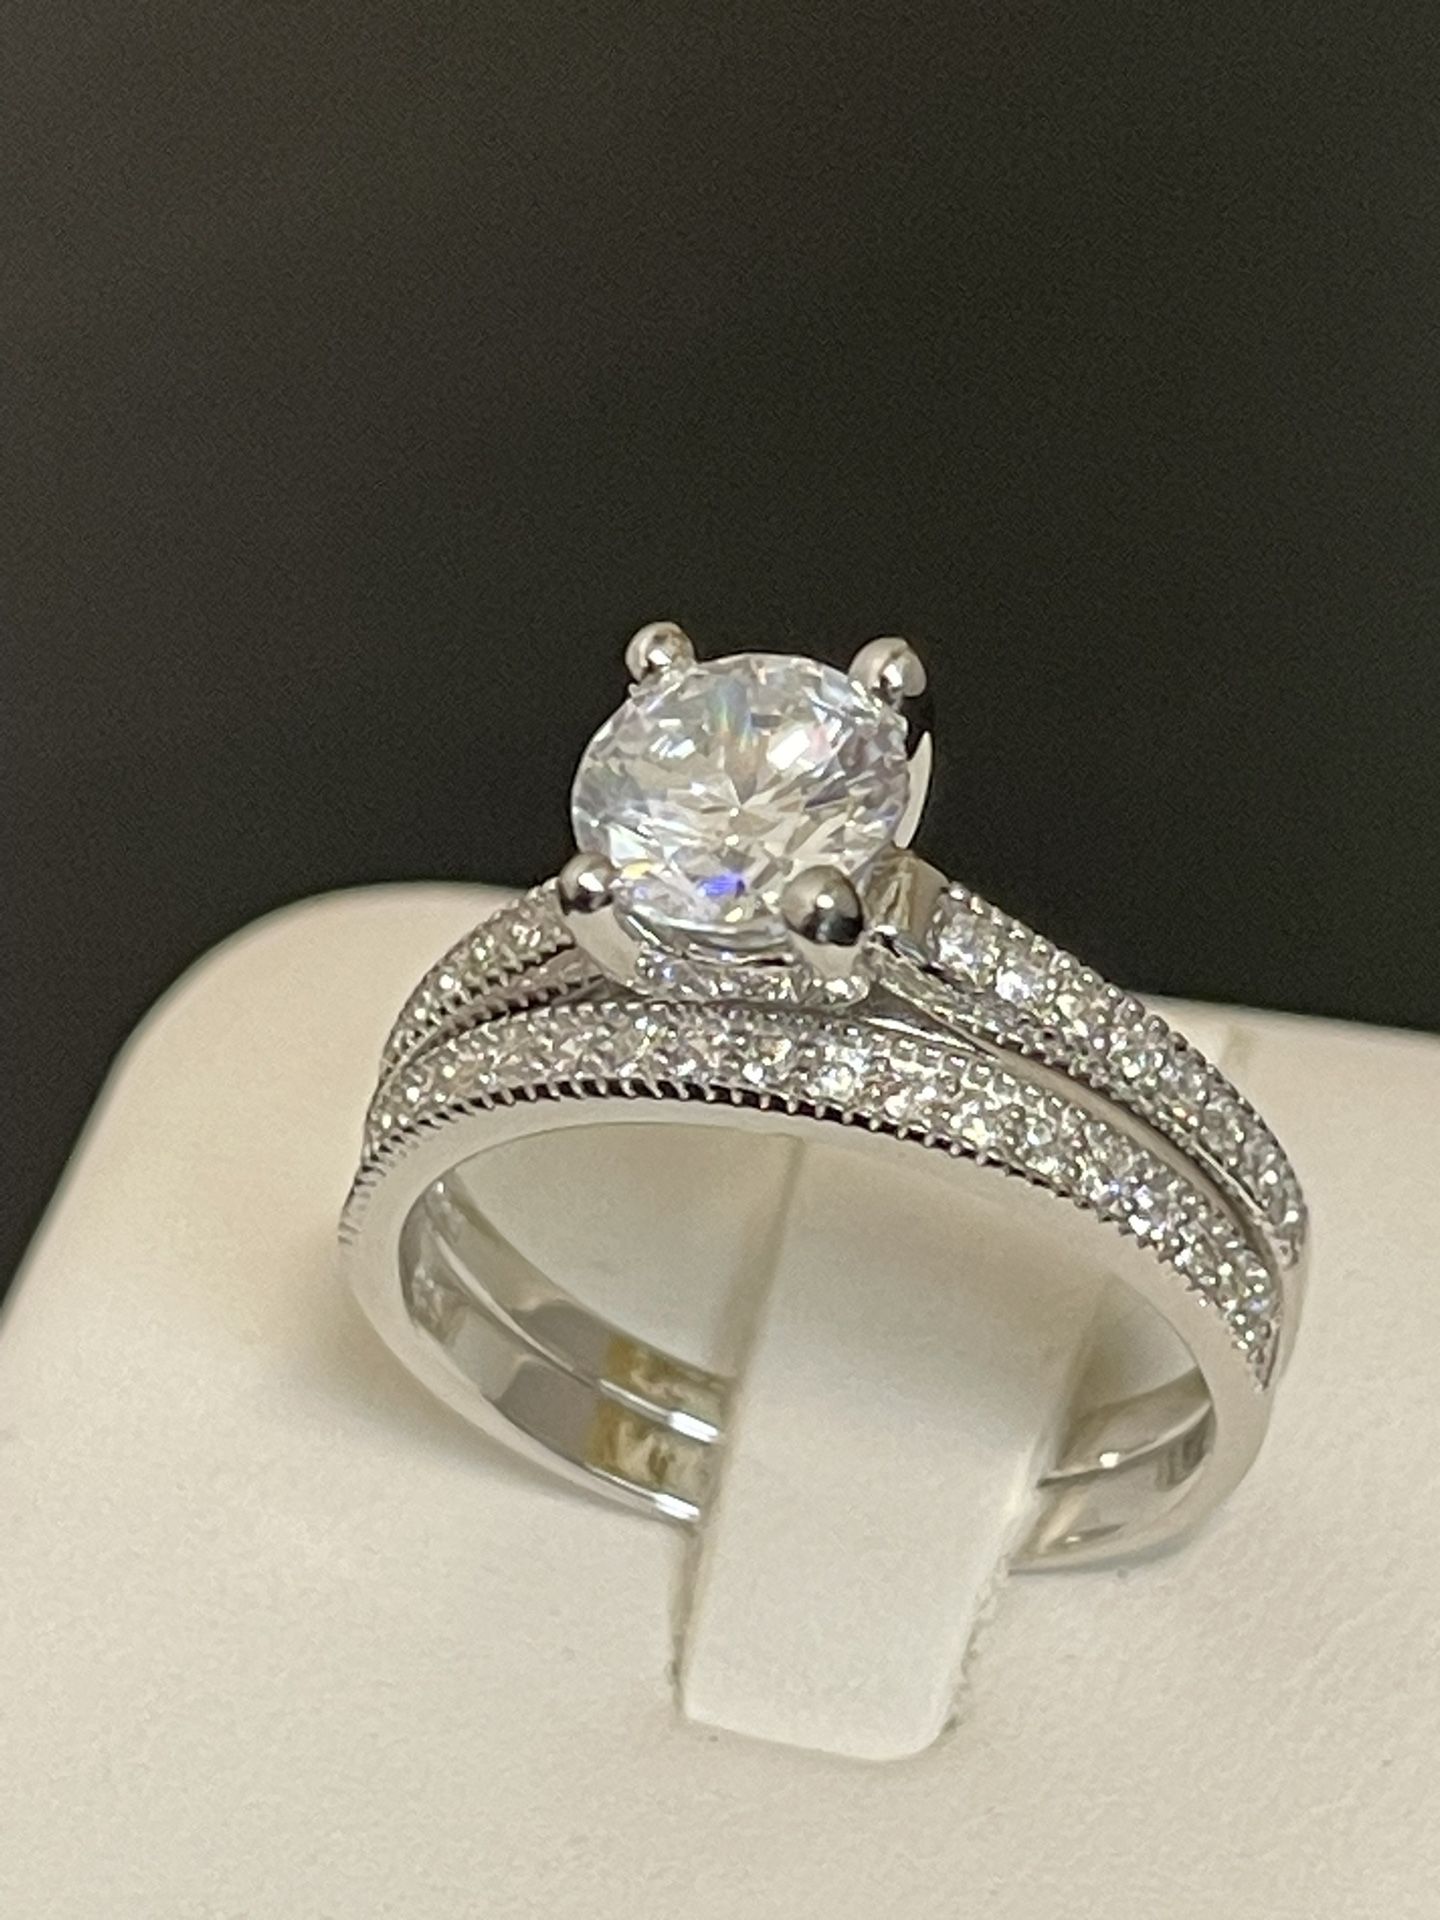 Women Engagement Wedding Ring Sets .925 Sterling Silver With Round Cut AAA CZ Size 5-11 